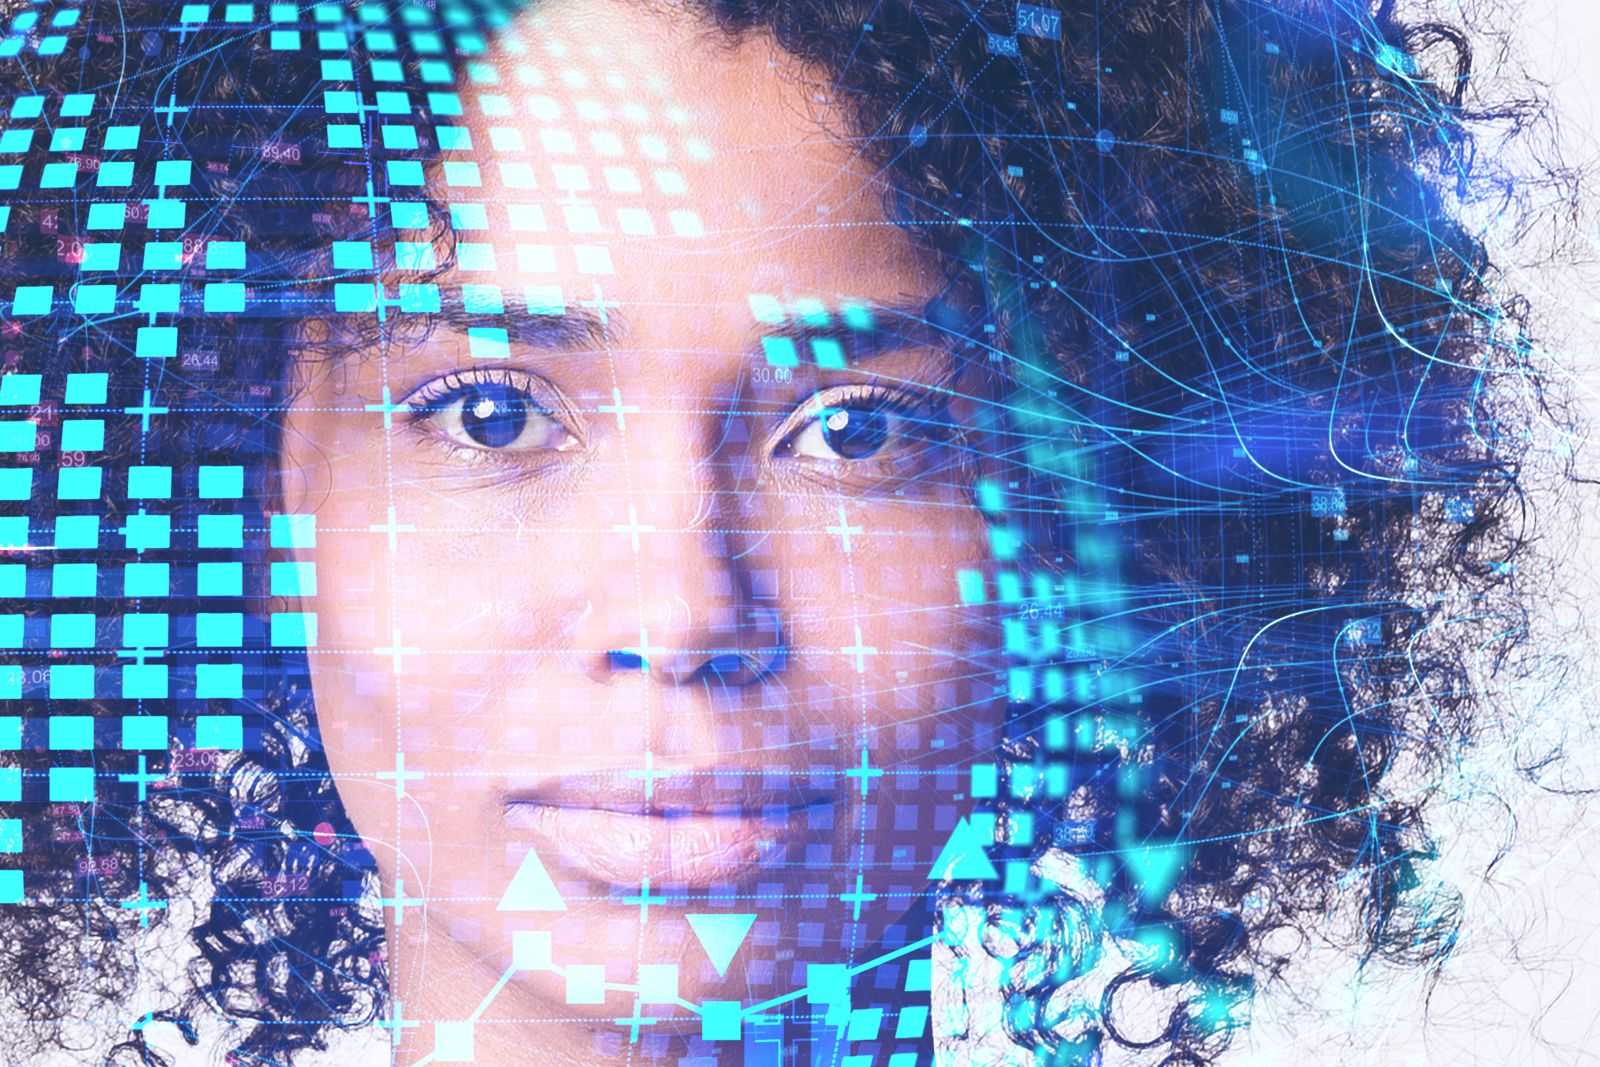 Black woman looking into camera with computer imagery overlaid to represent the digital world